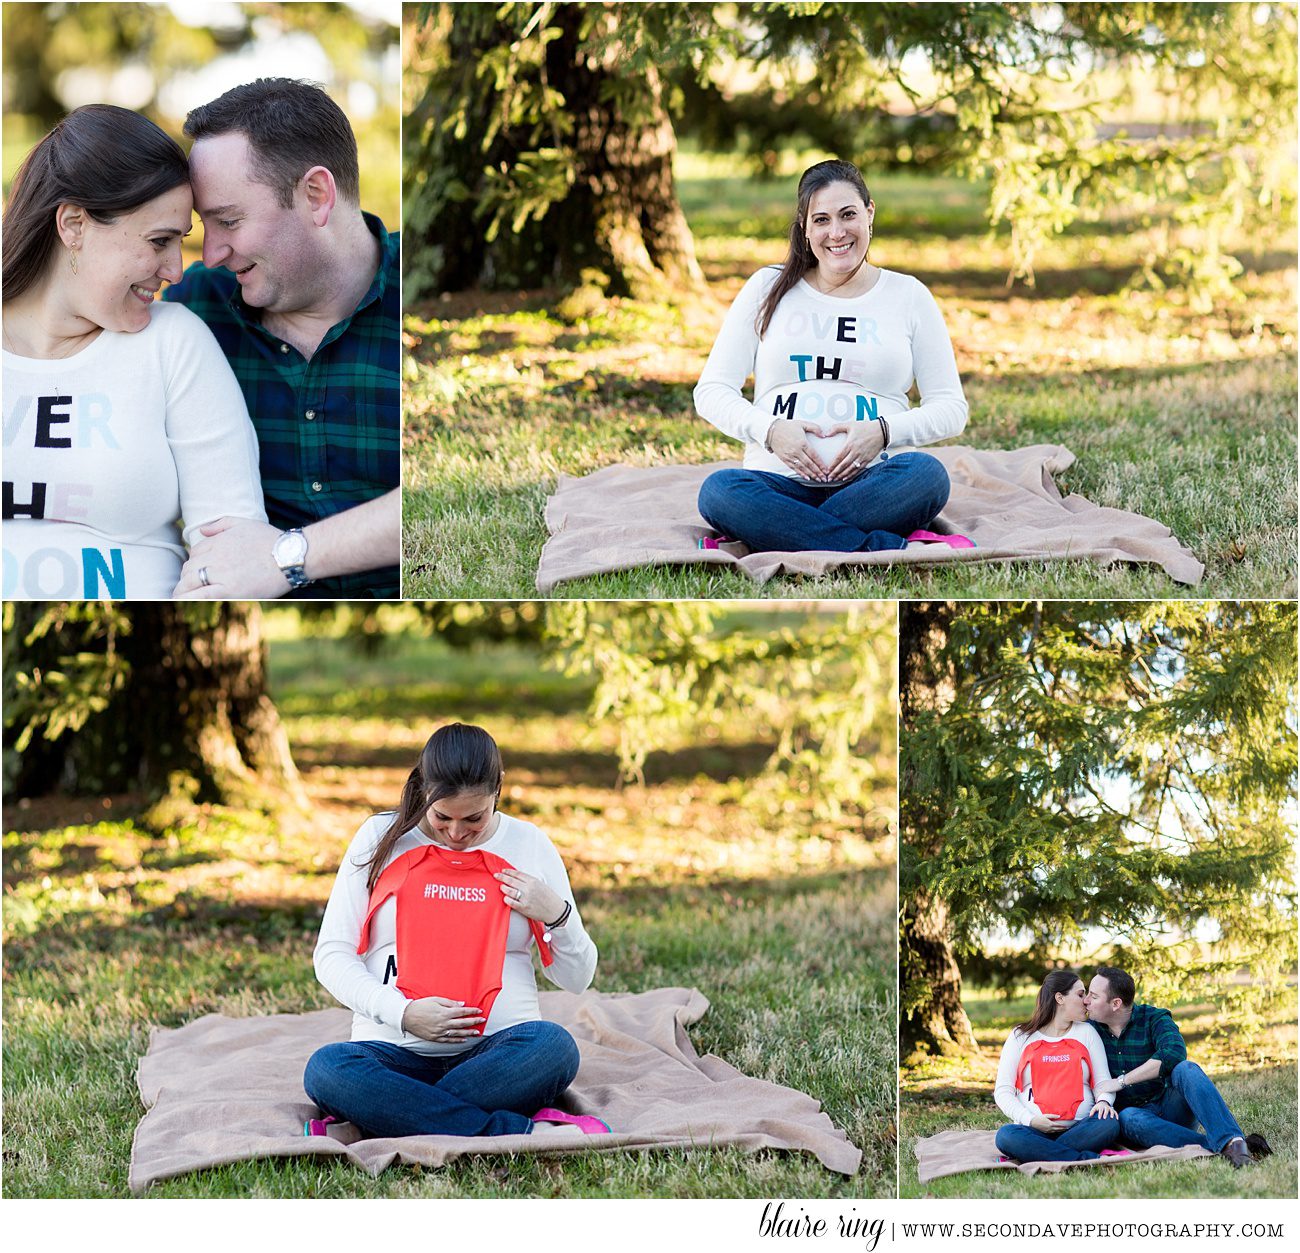 Full sun was no match for the light that emulated from a couple expecting their first baby, photographed by a Loudoun County maternity photographer.